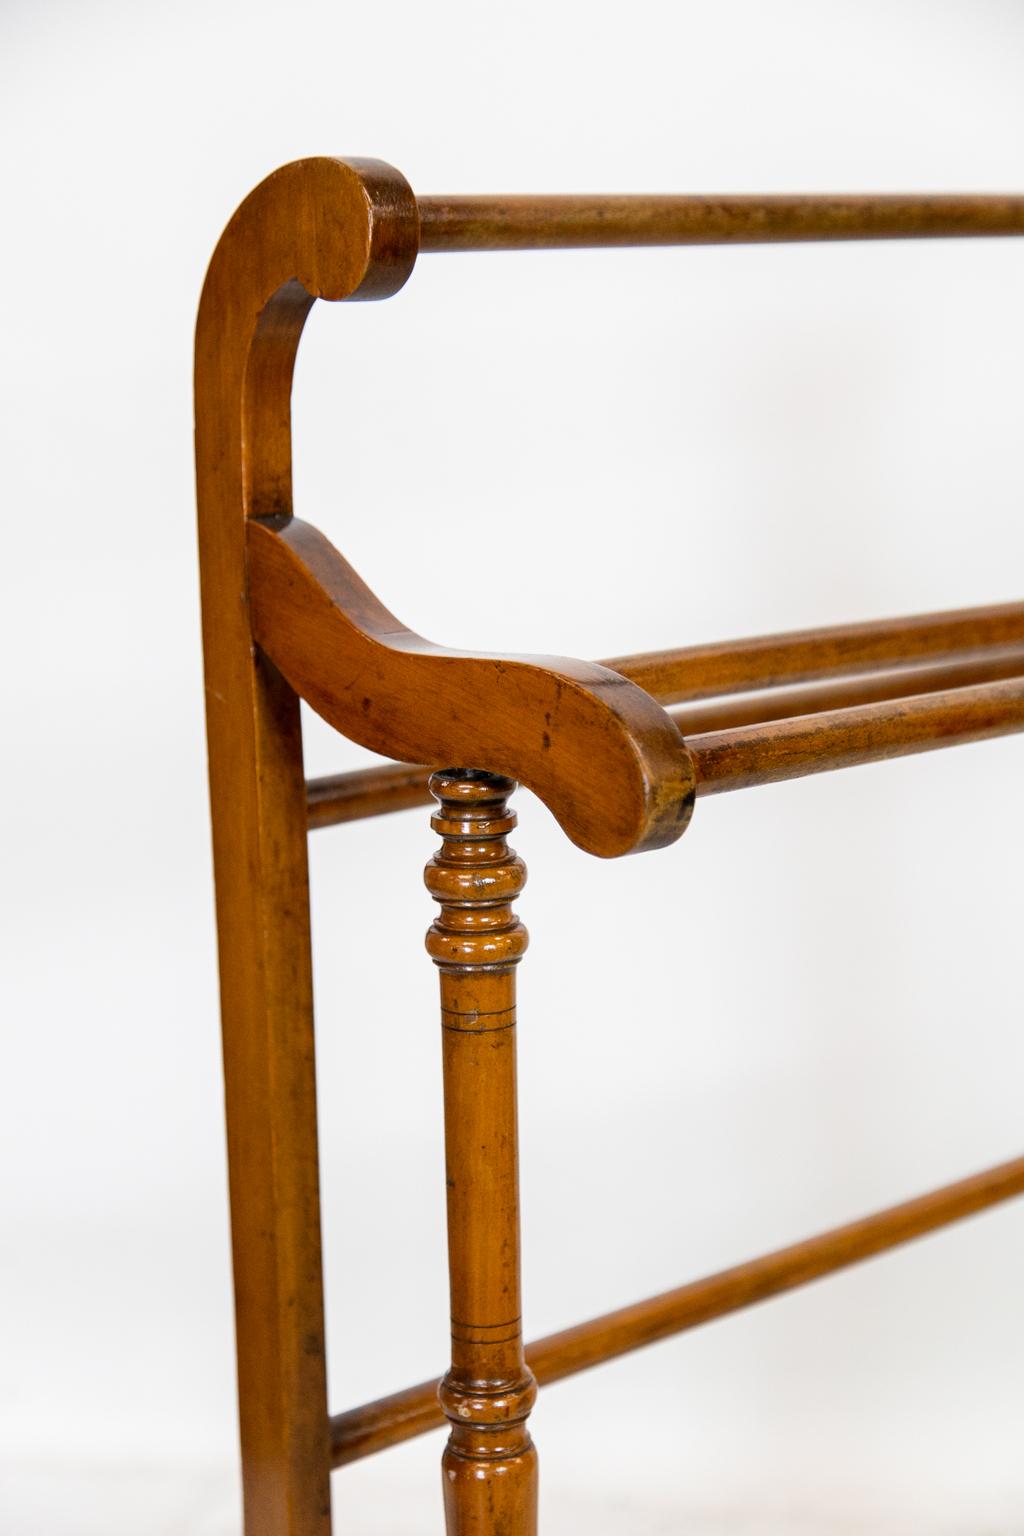 This rack has a rear leg with a scrolled upper top connected by a cross bar. The middle bars are supported by scrolled arms which are in turn supported by turned legs.